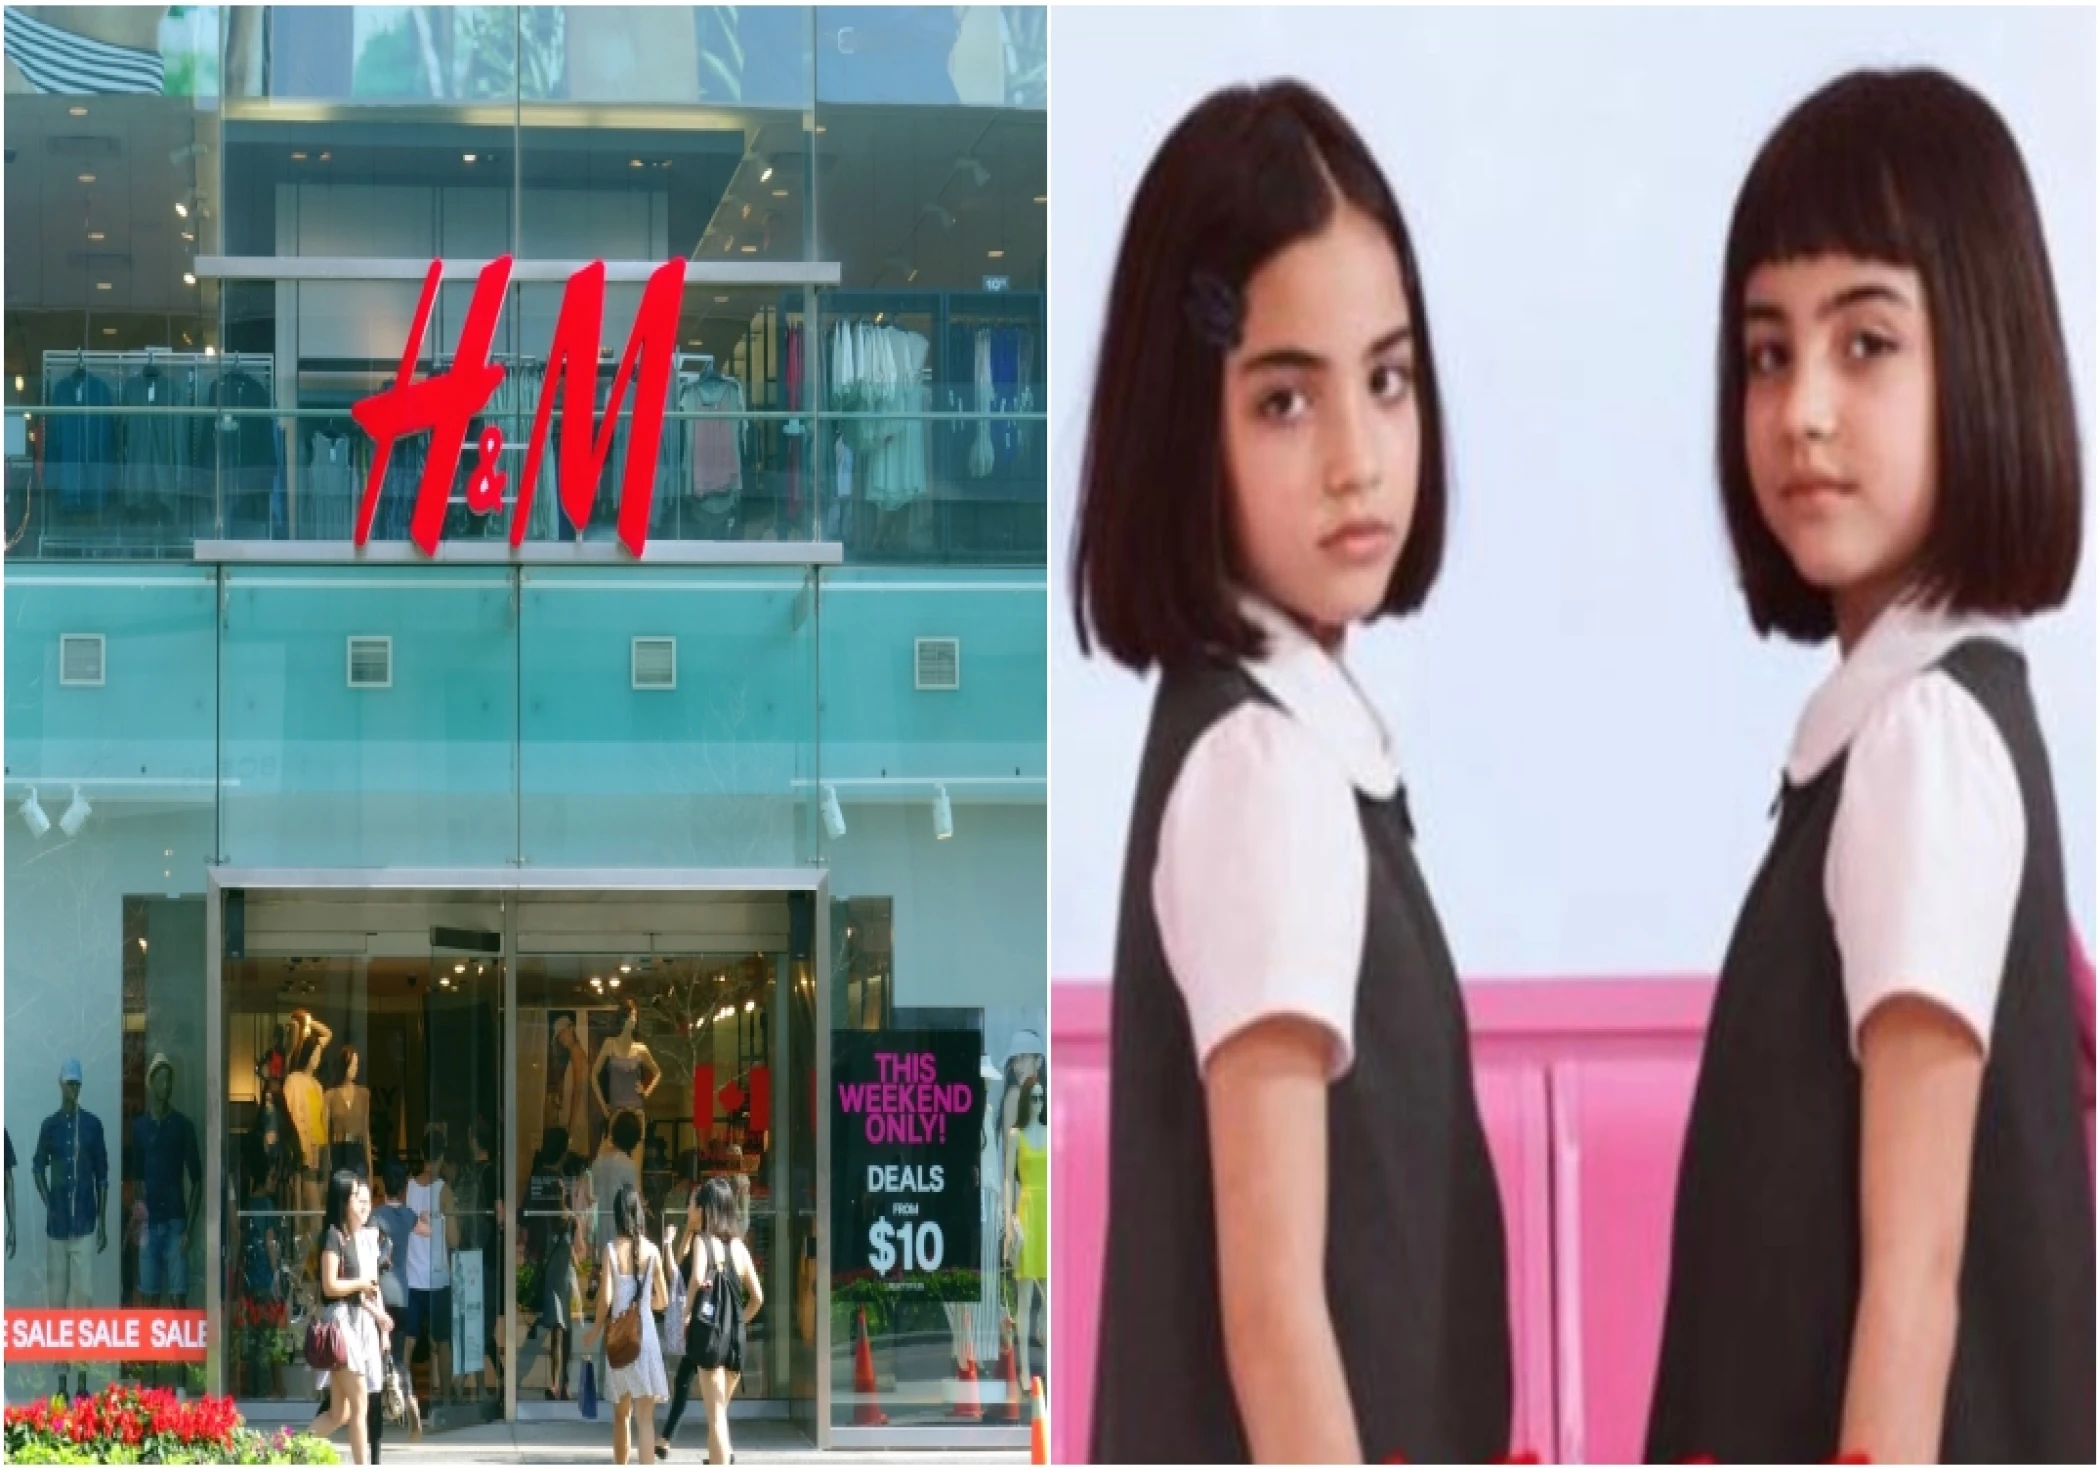 Australia: H&M Faces Backlash and Drops Controversial Ad Accused of Sexualizing Children